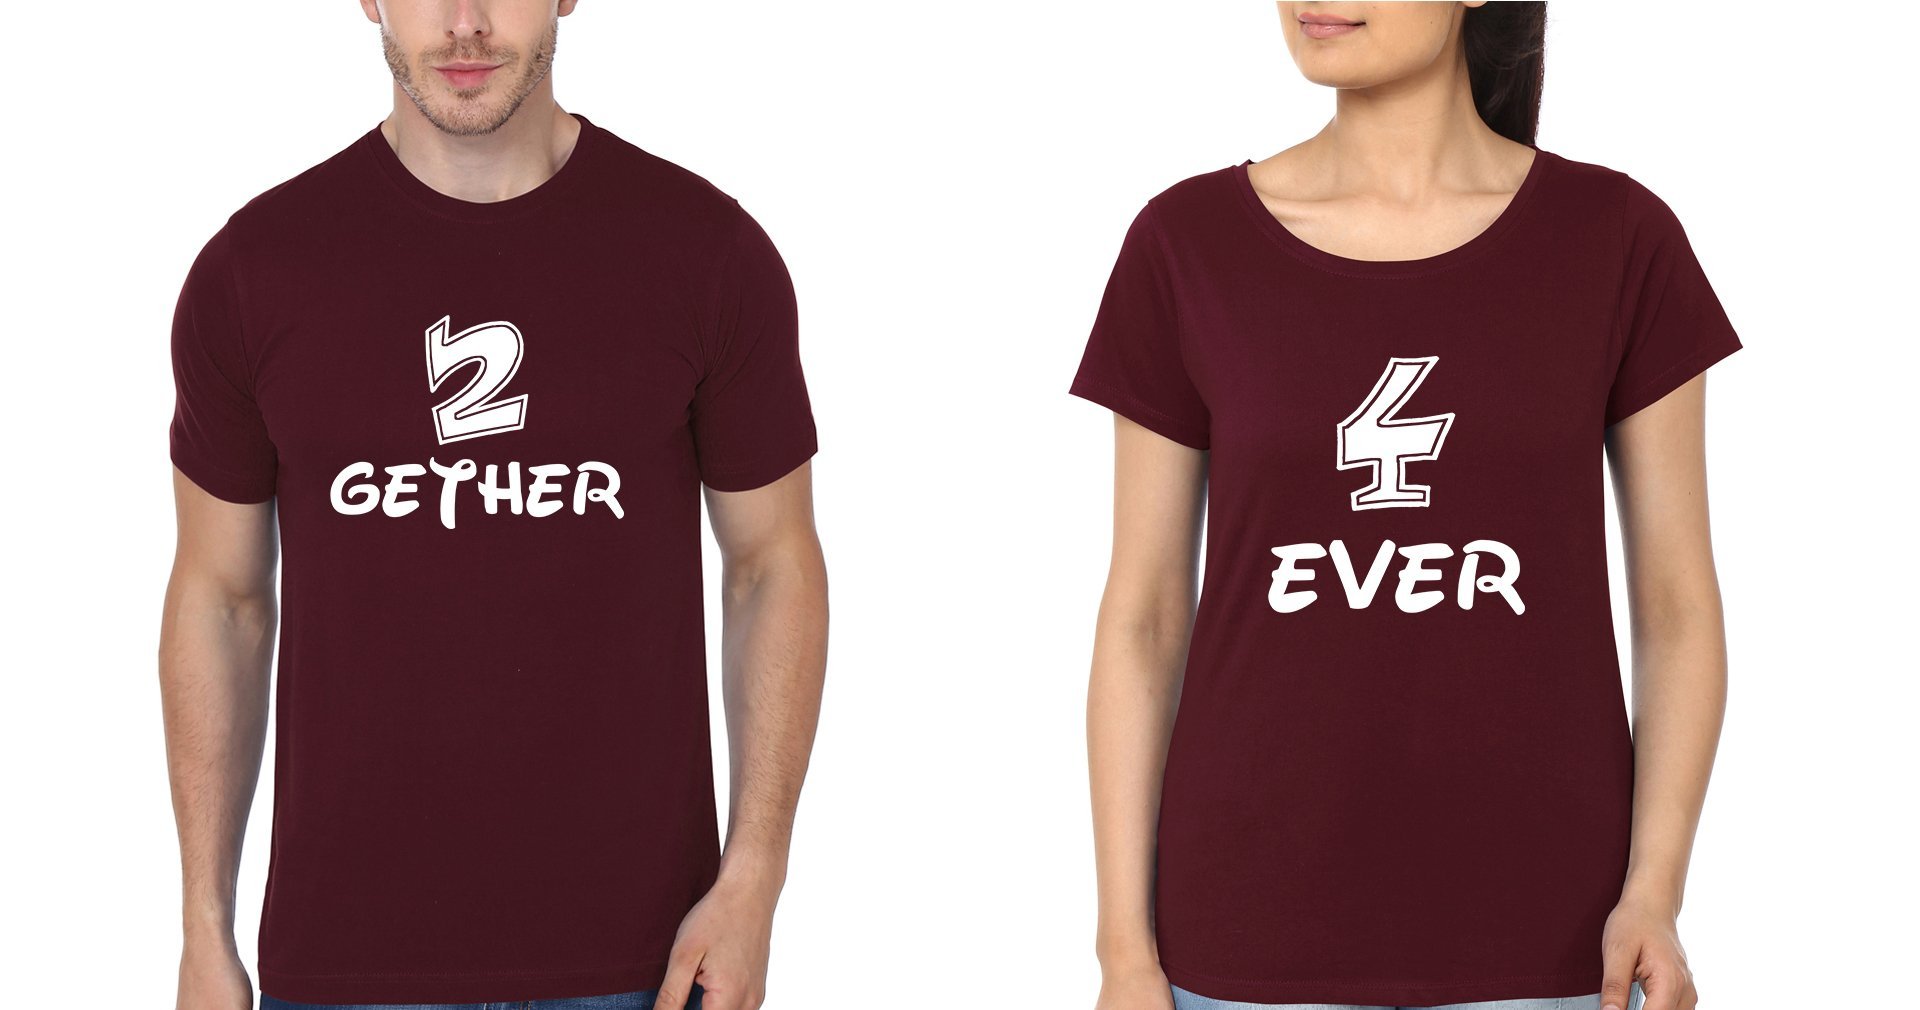 2gether 4ever Couple Half Sleeves T-Shirts -FunkyTradition - FunkyTradition